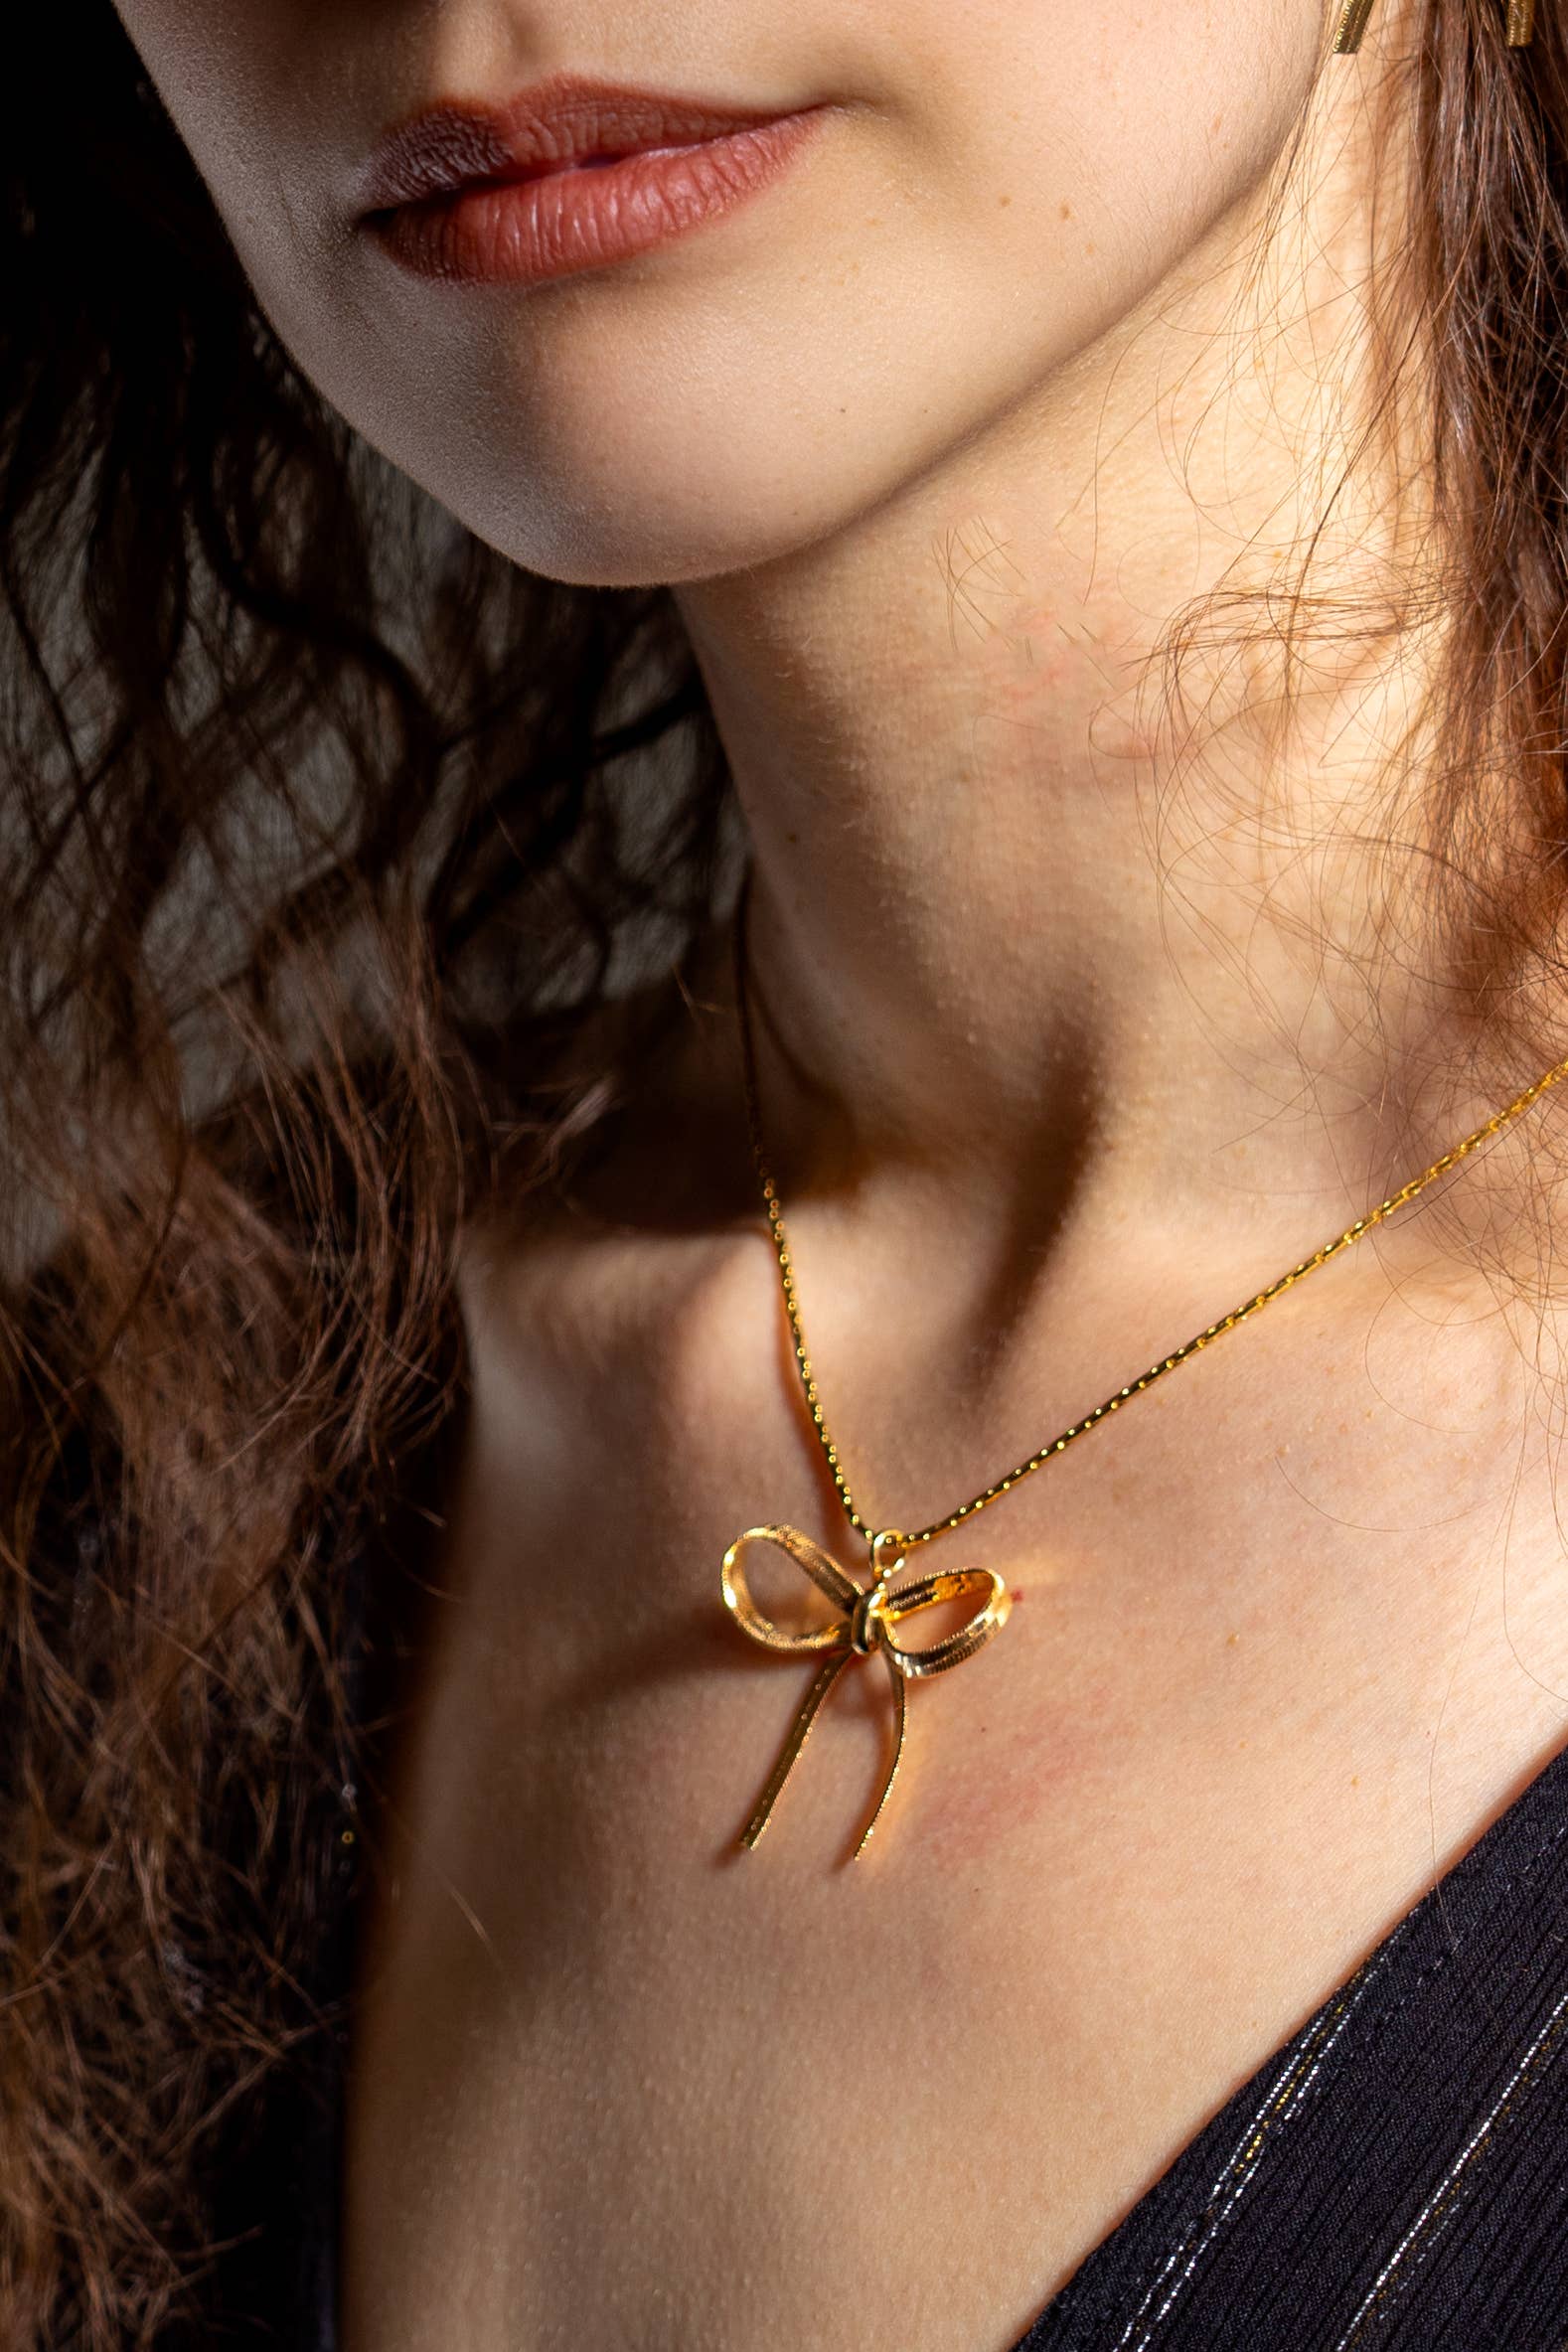 The Bow is Mine Necklace - 18k Gold Plated - Out of the Blue